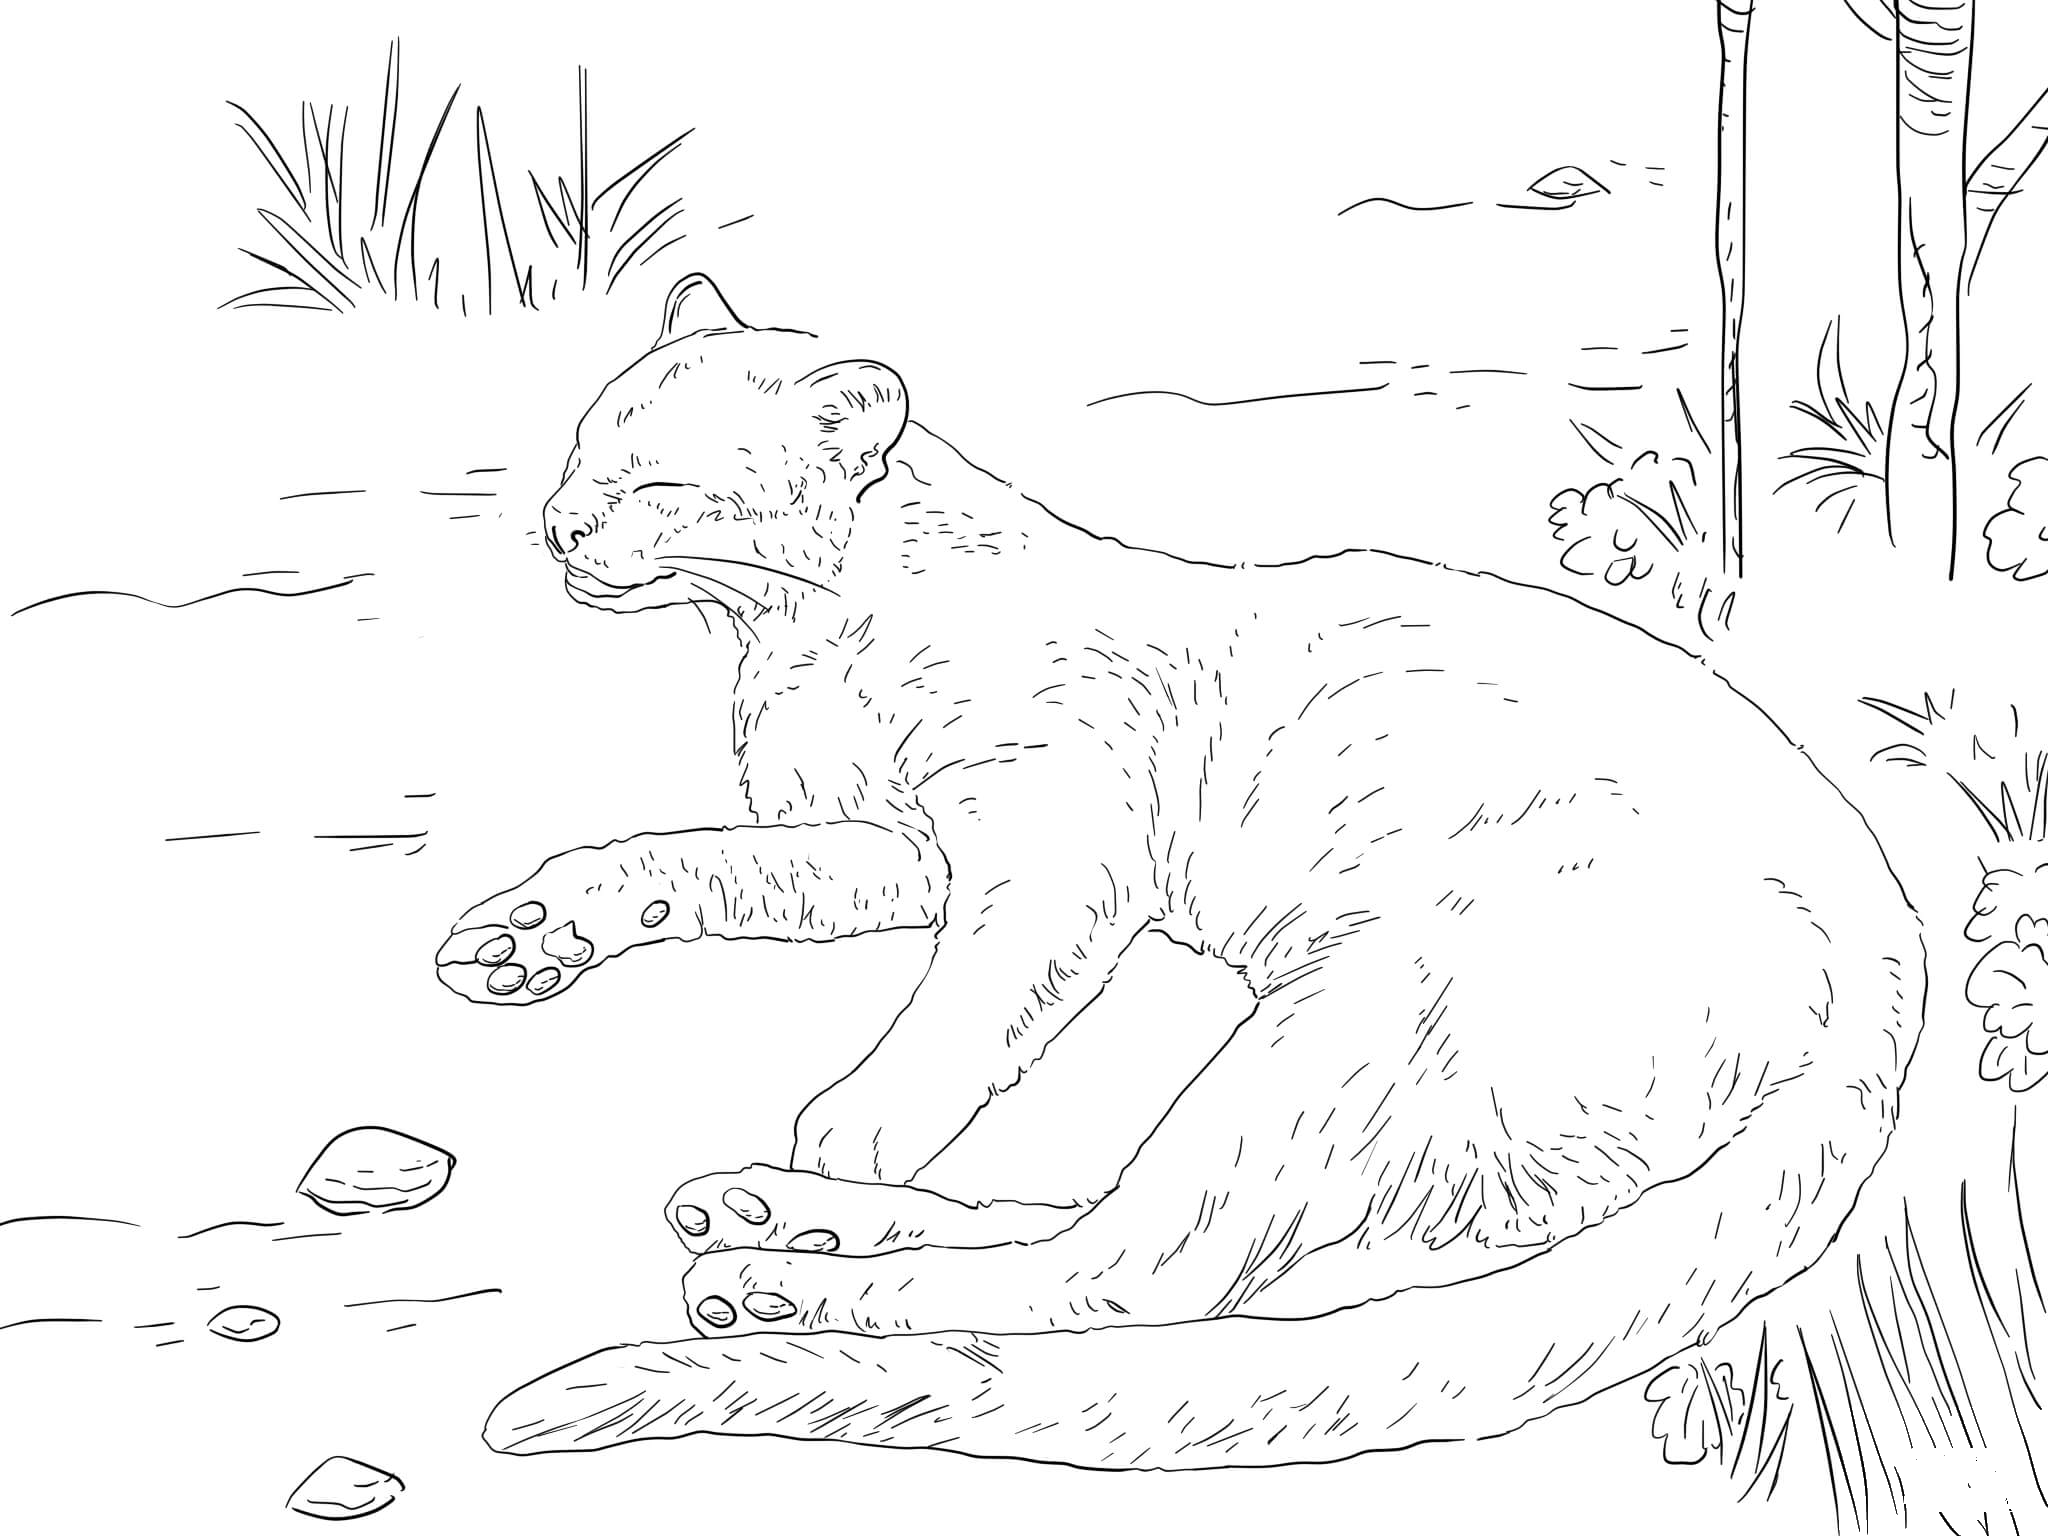 Jaguarundi Resting on a Ground coloring page - ColouringPages